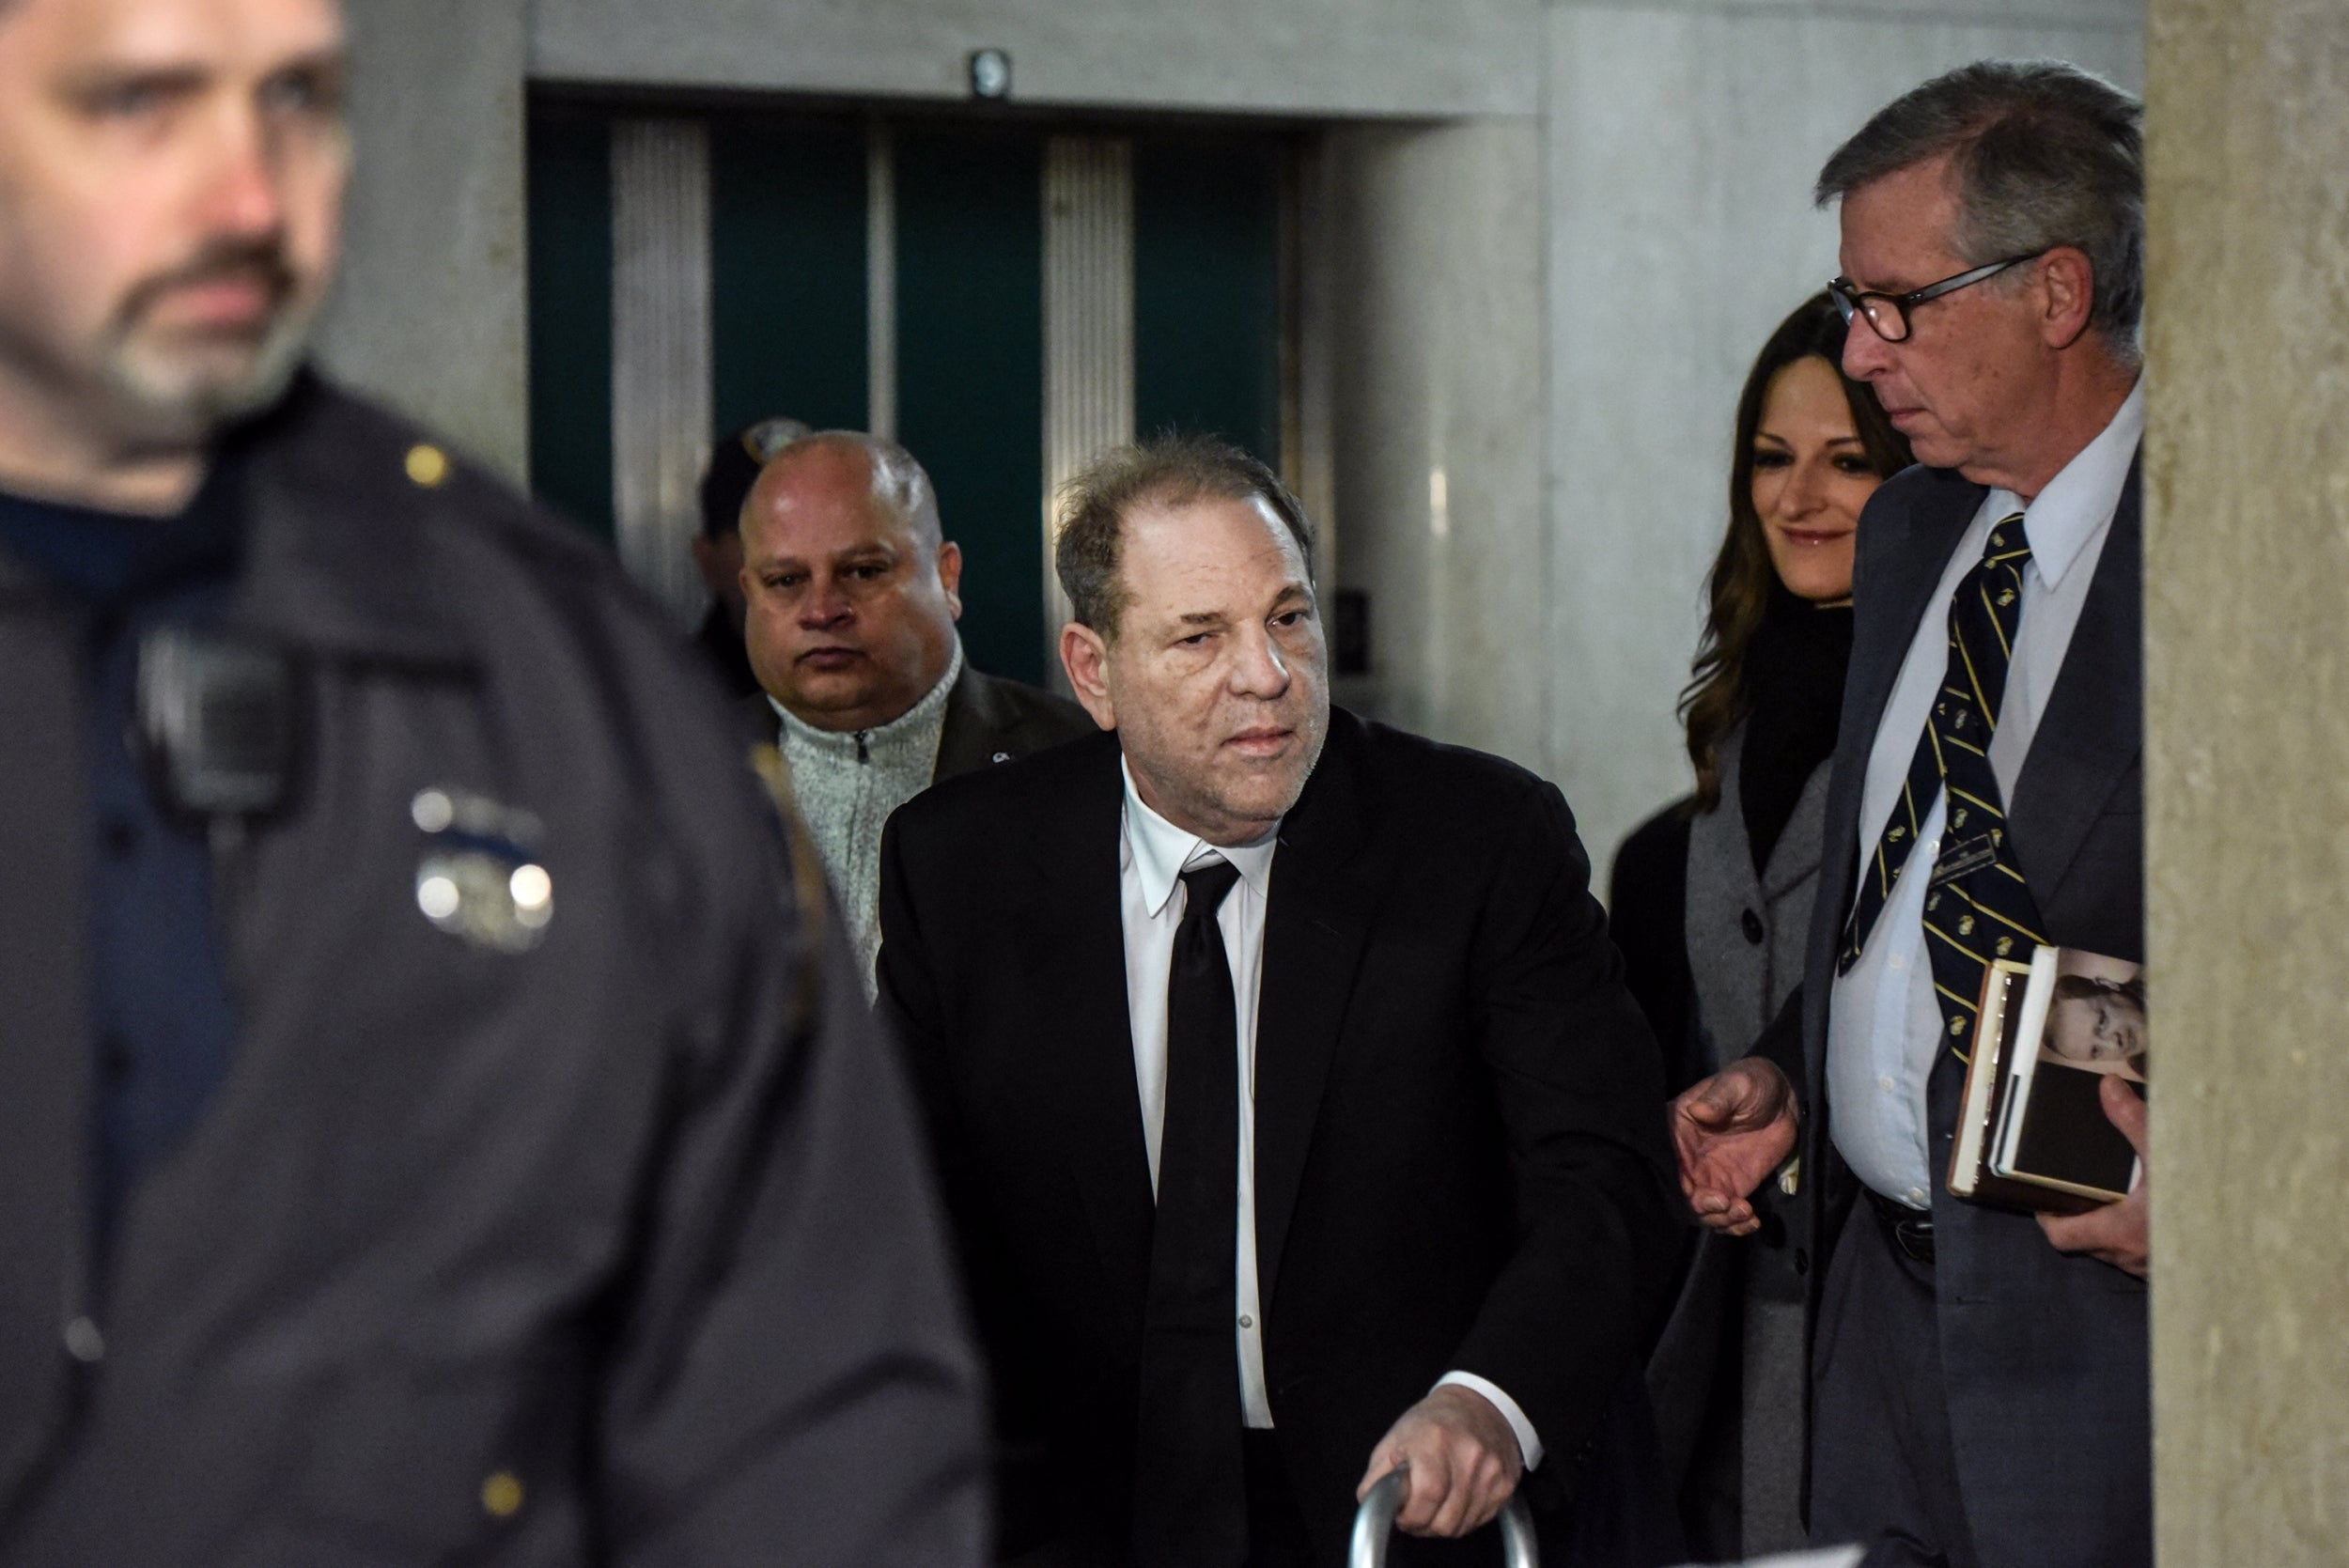 Weinstein arrives at New York Criminal Court for the first day of his trial on sexual assault charges (Getty)